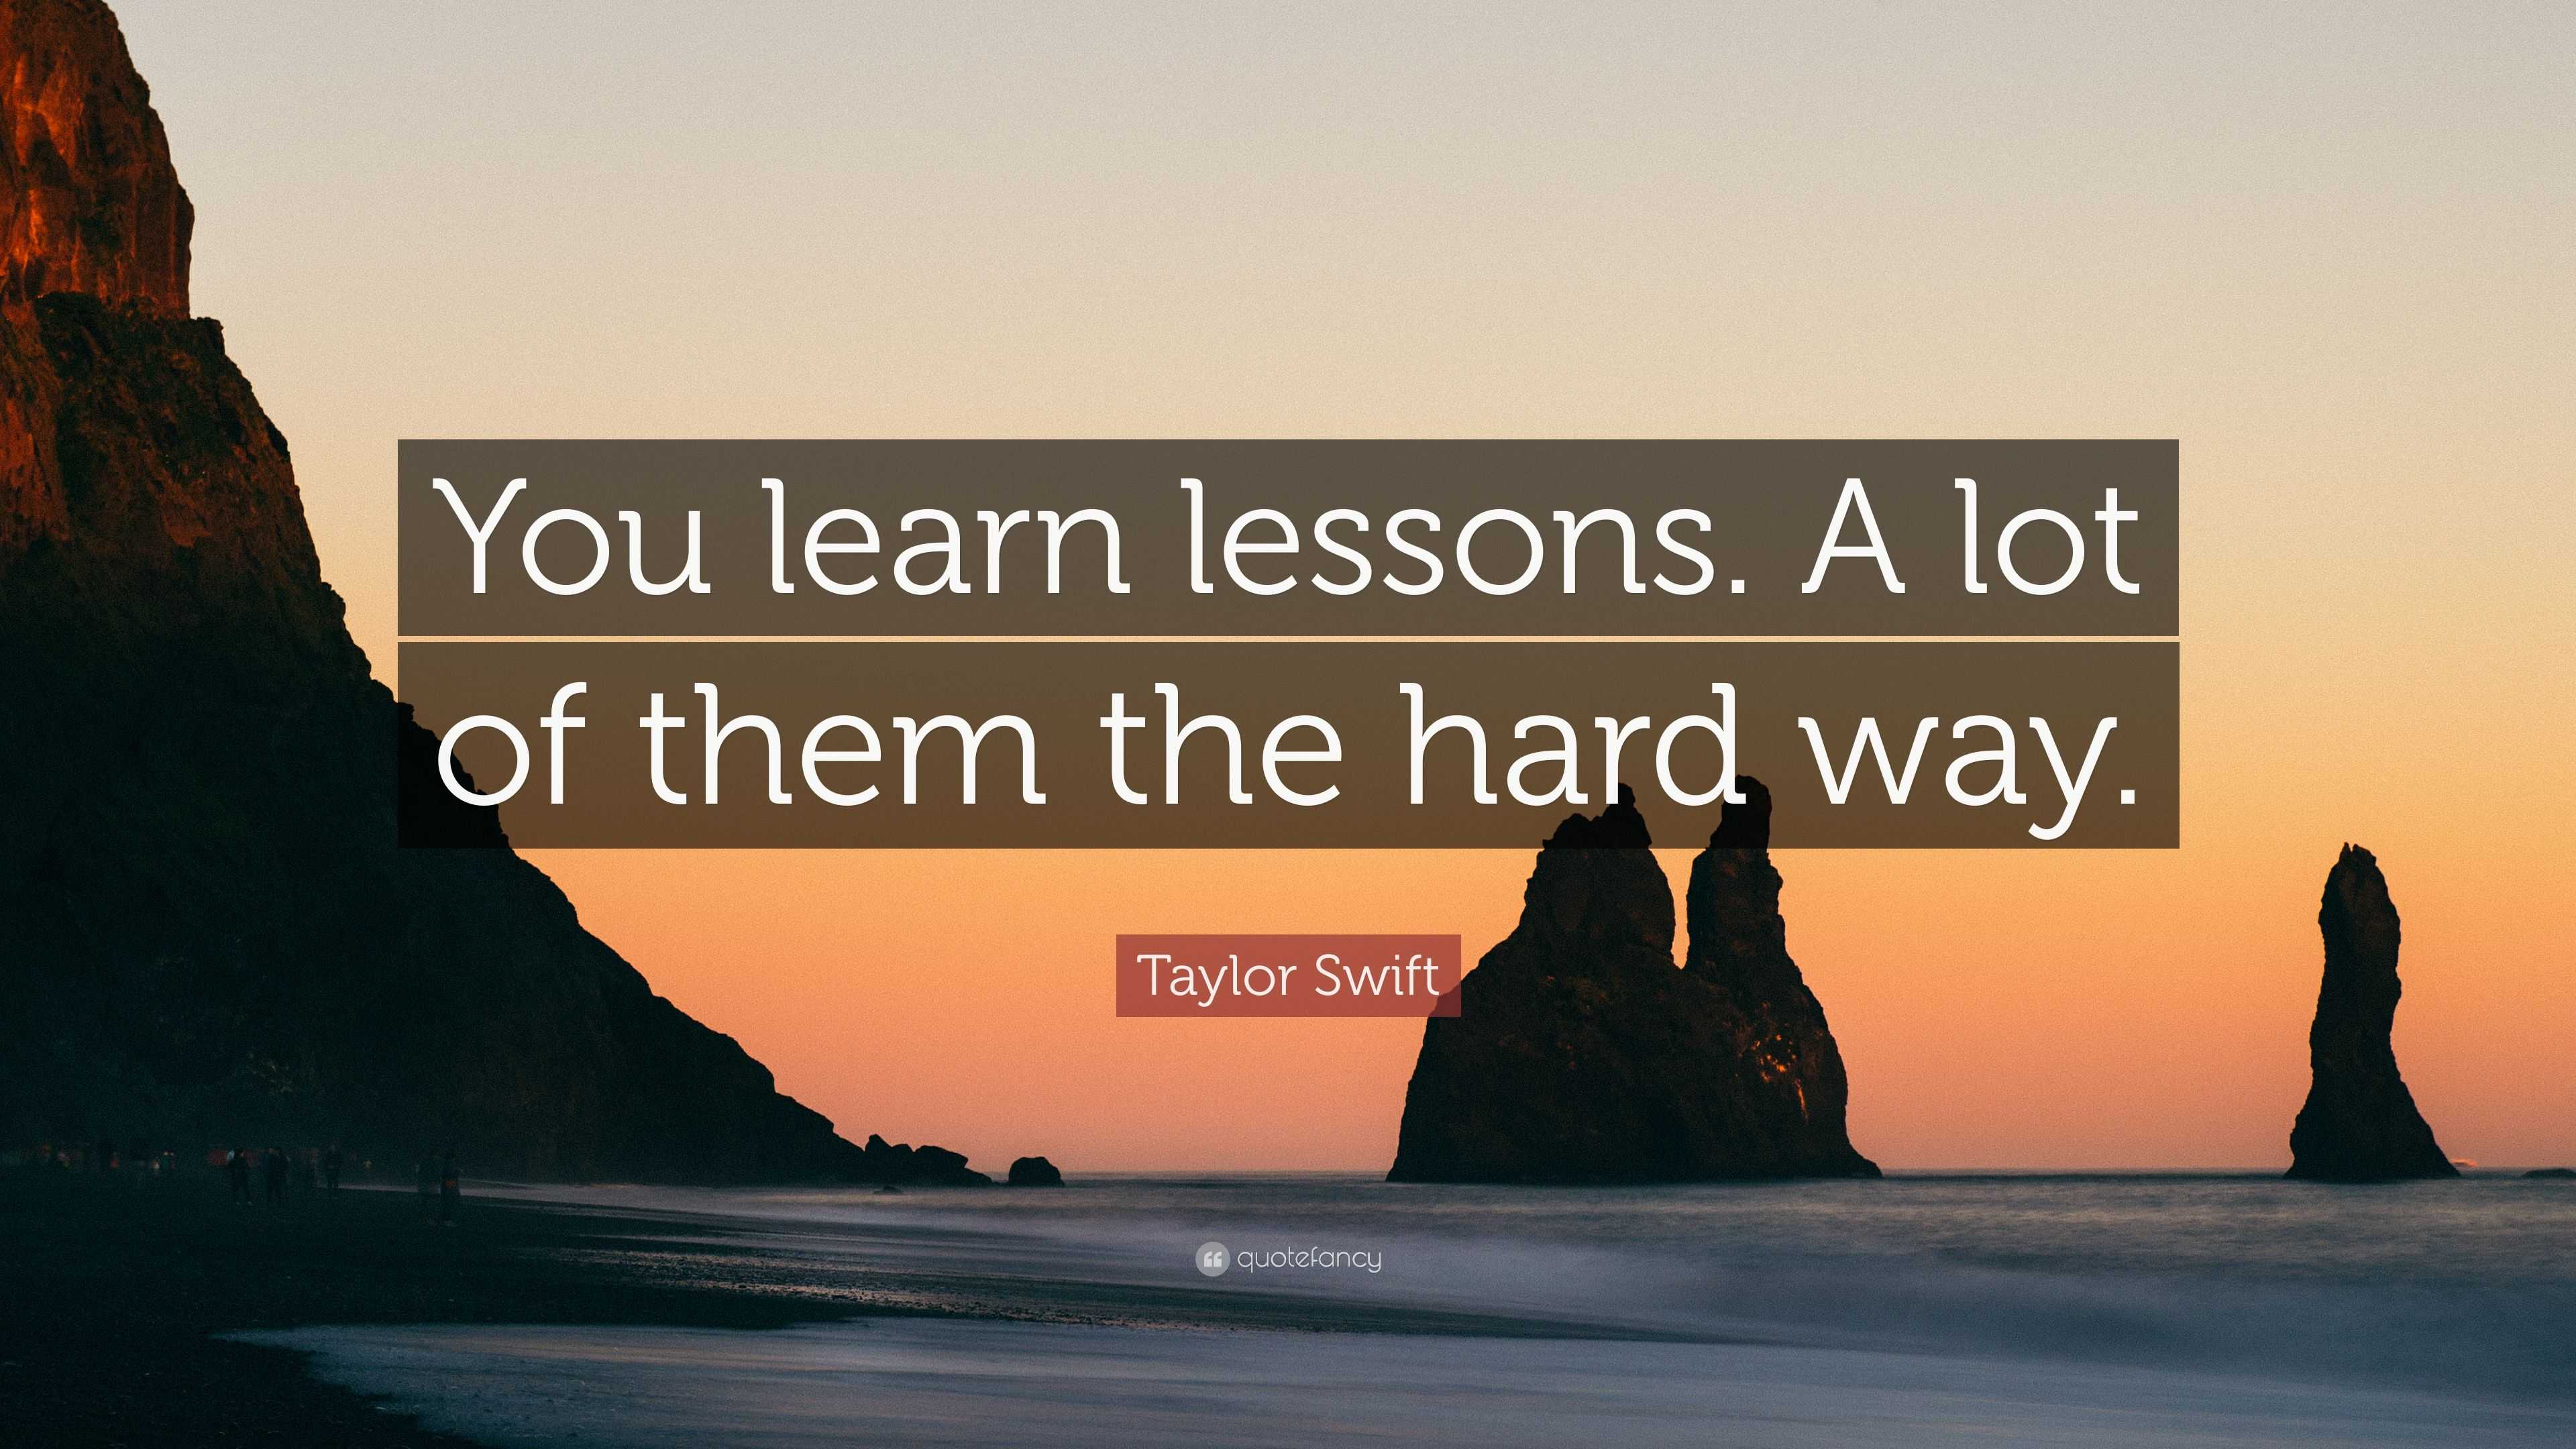 You learn lessons. A lot of them the hard way.